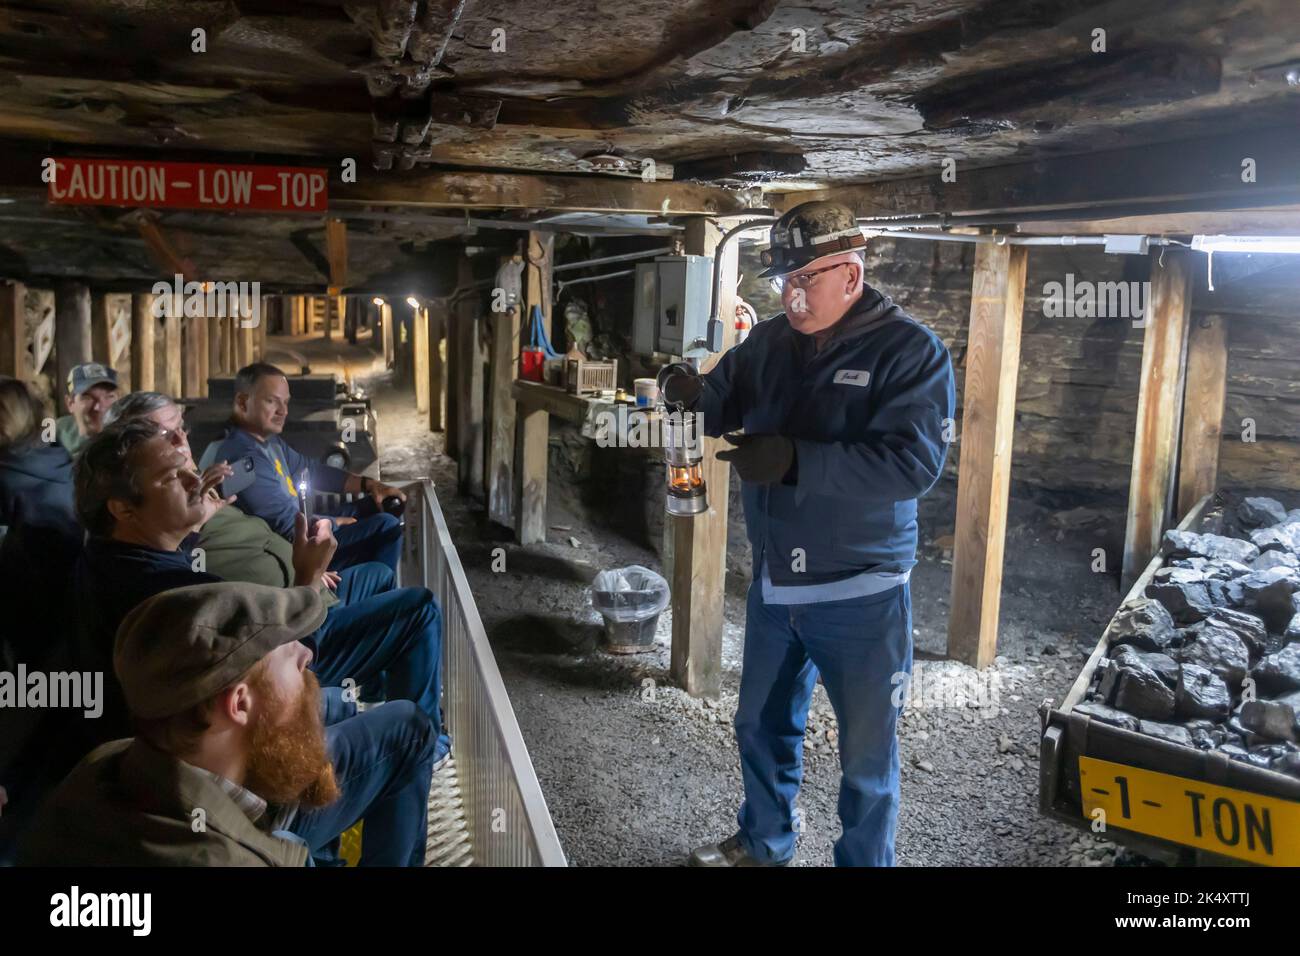 Beckley, West Virginia - Retired coal miner Jack Turner leads visitors on a tour of the Beckley Exhibition Coal Mine. The low-seam coal mine operated Stock Photo